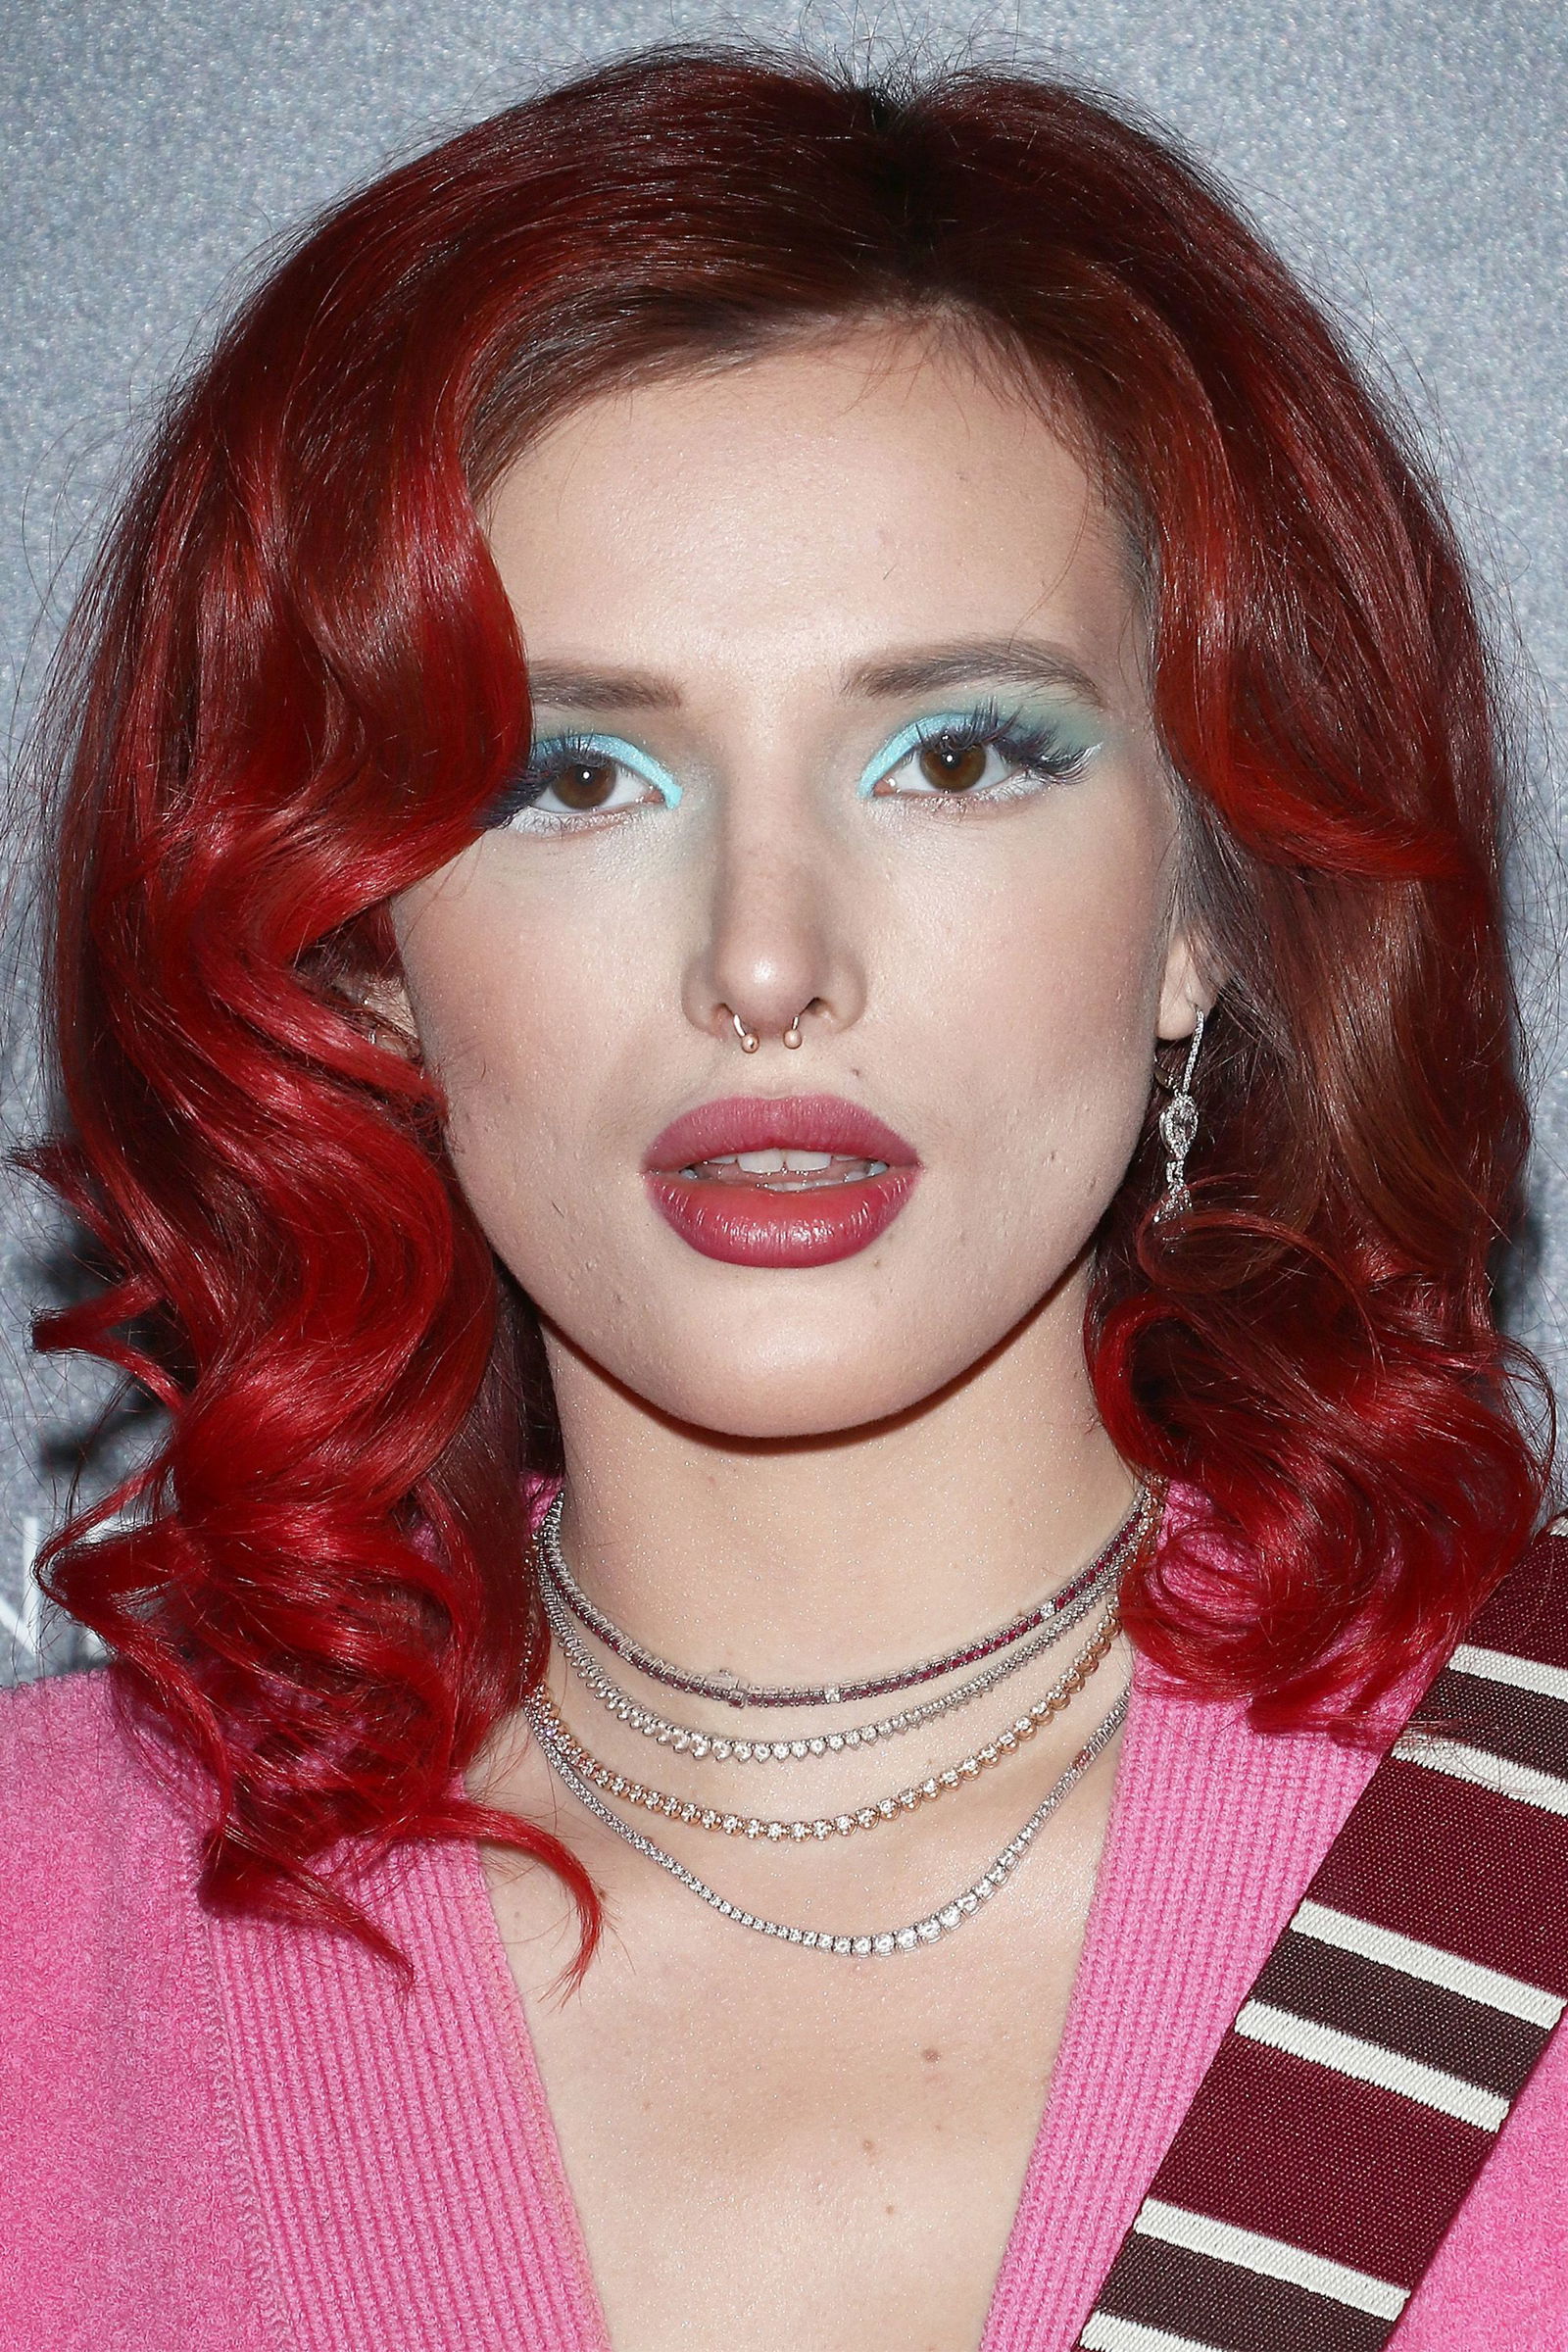 Photo by silvie with the username @silvie, posted on May 10, 2019. The post is about the topic Curvy woman sexy redhead woman and the text says 'ellle-redhead-bella-thorne-gettyimages-936702080-1536679103.jpg'